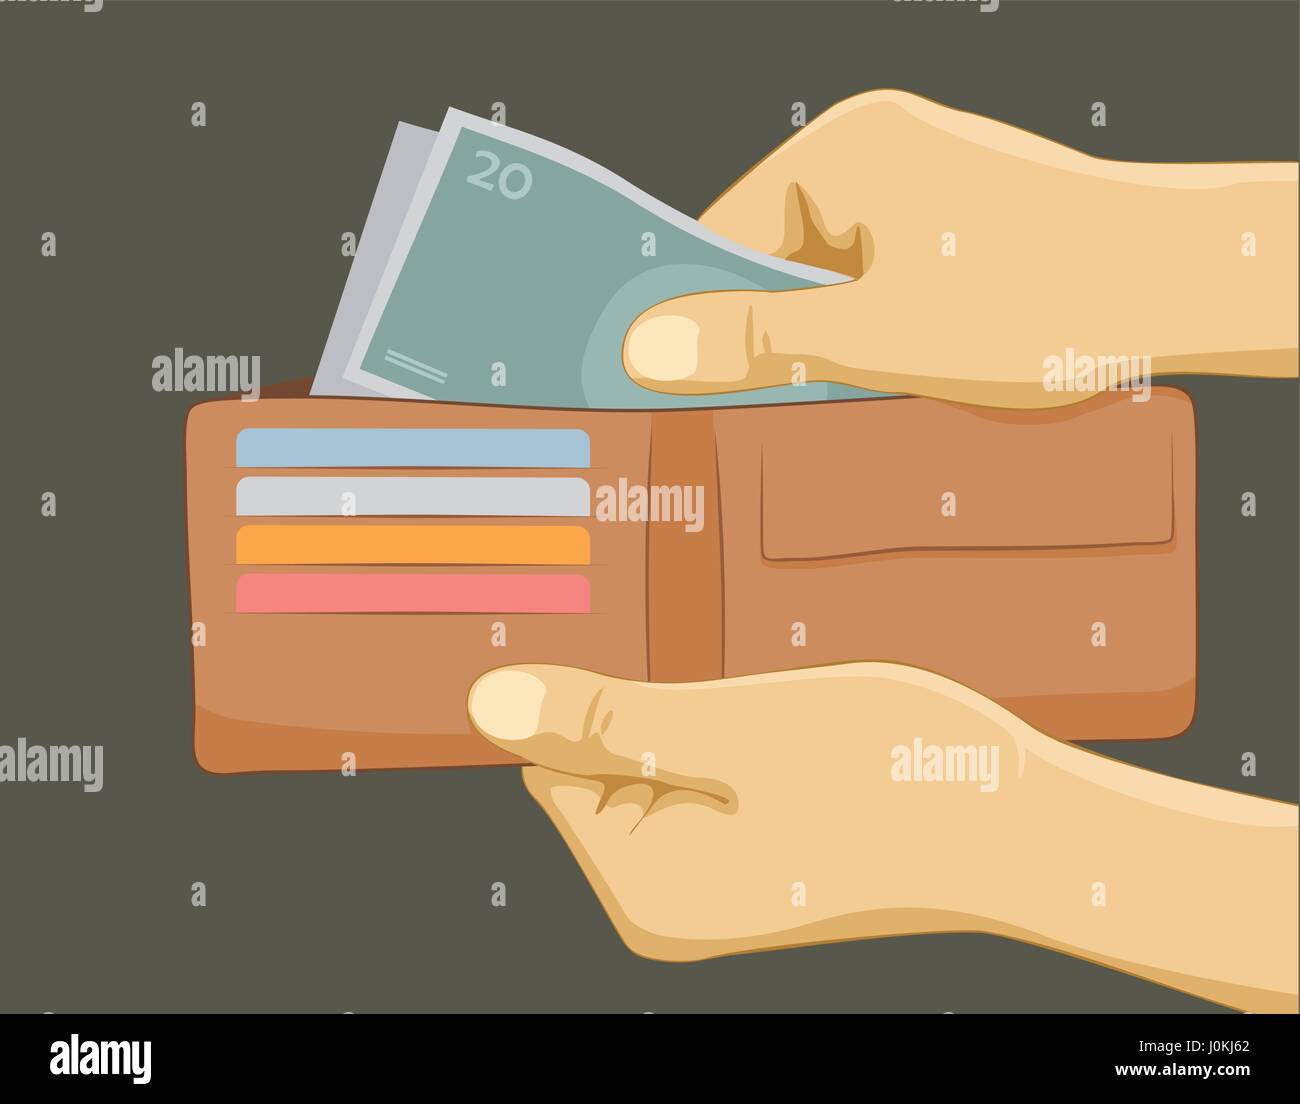 Hand putting money in wallet. Paying with cash concept. Flat vector illustration Stock Vector